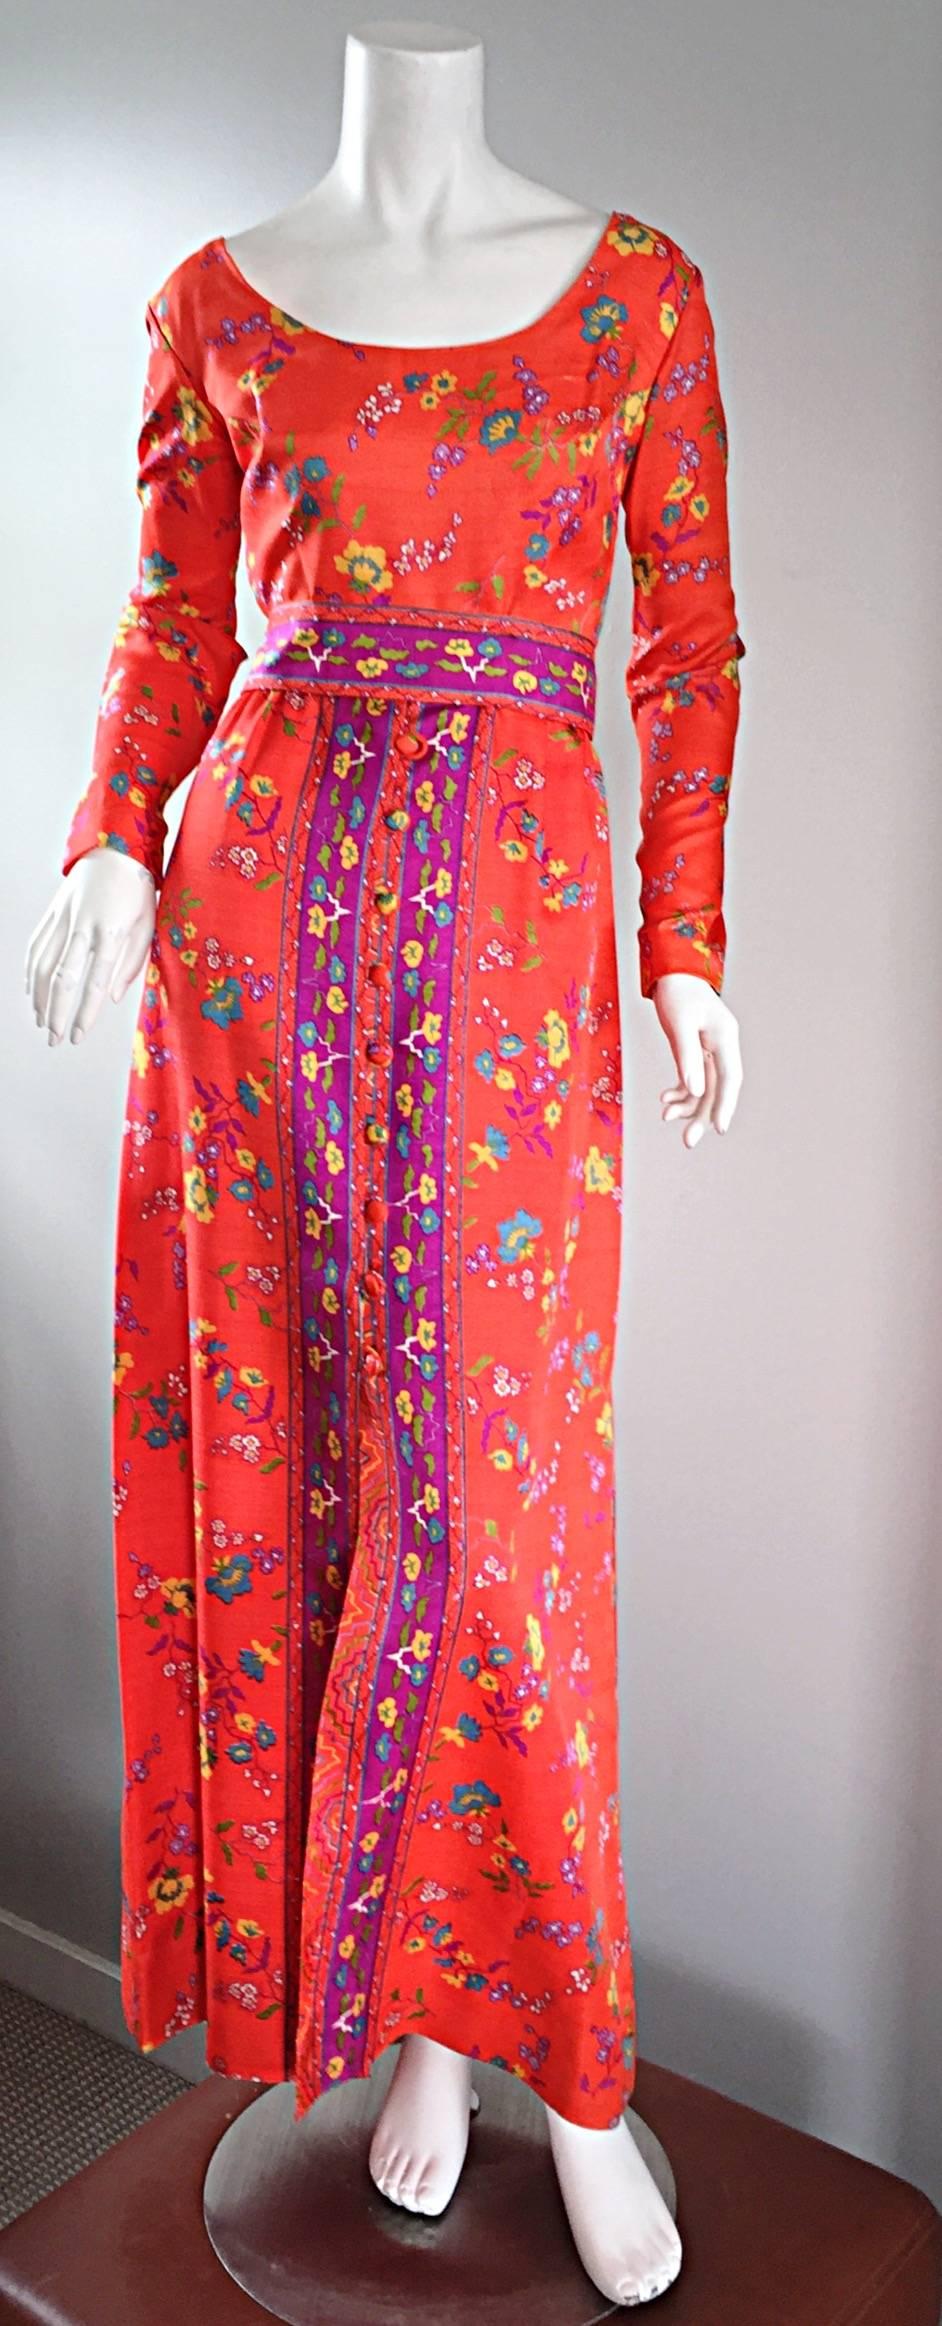 Amazing vintage OSCAR DE LA RENTA early 1970s gown! Wonderful vibrant colors of bright orange, purple, green, blue, yellow, and pink! Fabric covered (functional) buttons up the skirt, which can be left partially undone for a more provocative look.